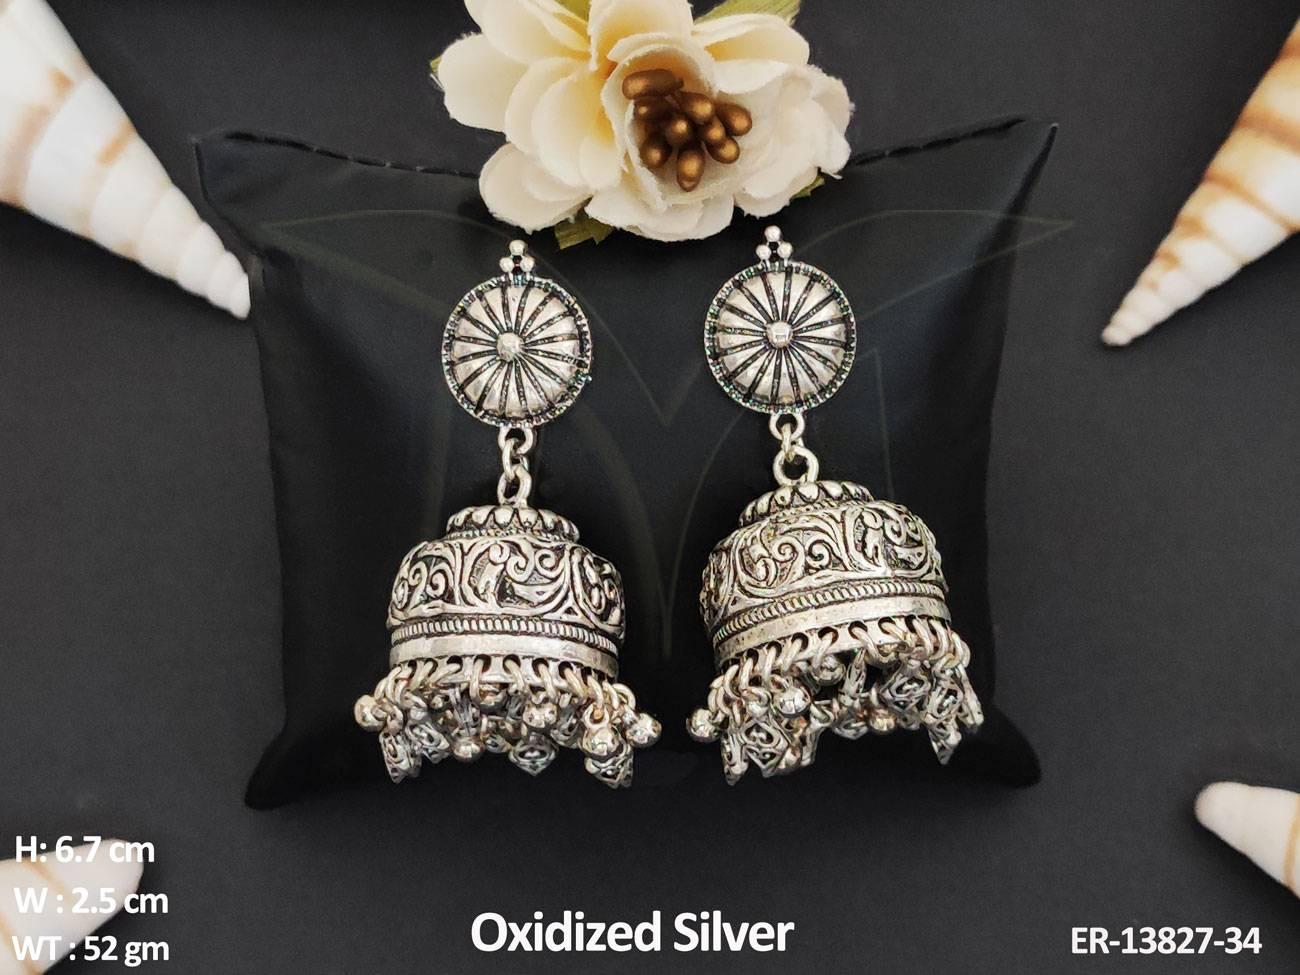 Expertly designed, these Oxidised Silver Polish Jhumka Earrings add a touch of antique charm to any party outfit.